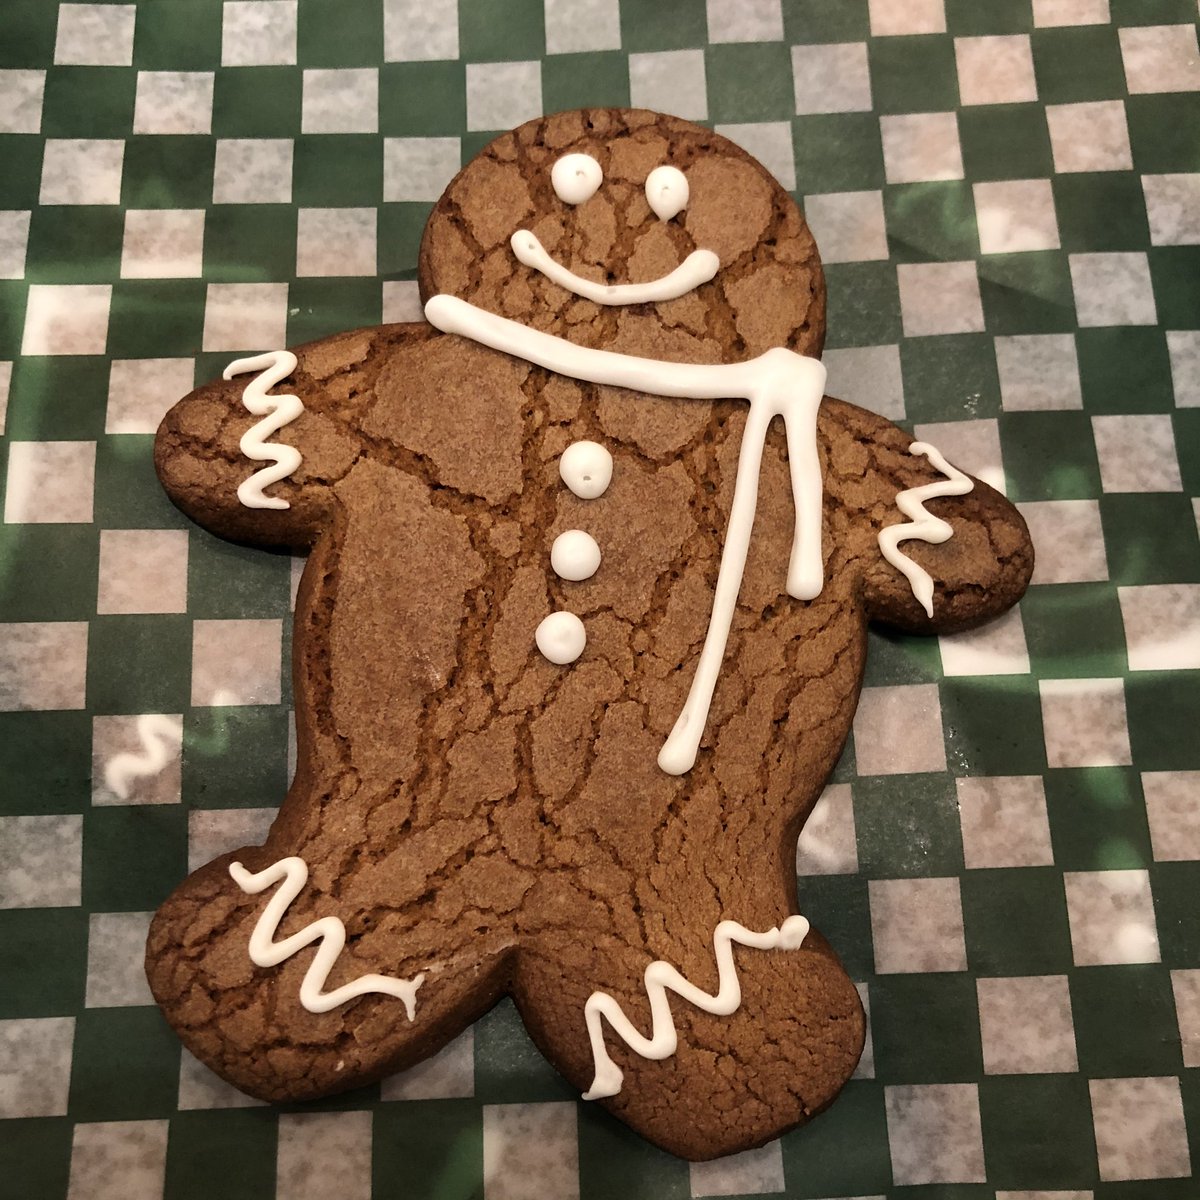 How do you eat your gingerbread people? I like the feet first approach. Thanks @eatlocalsource!